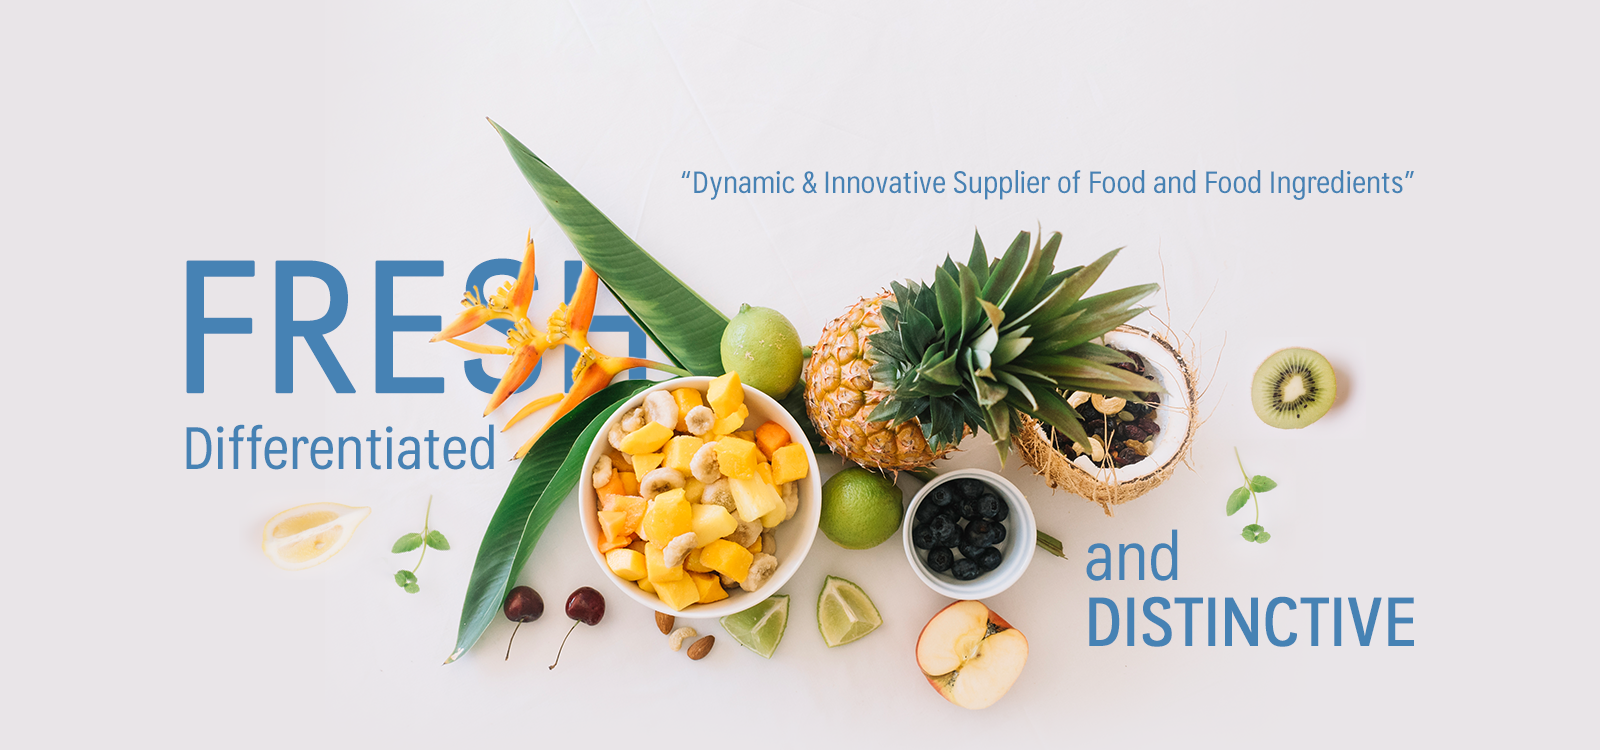 Dynamic & Innovative Supplier of Food and Food Ingredients